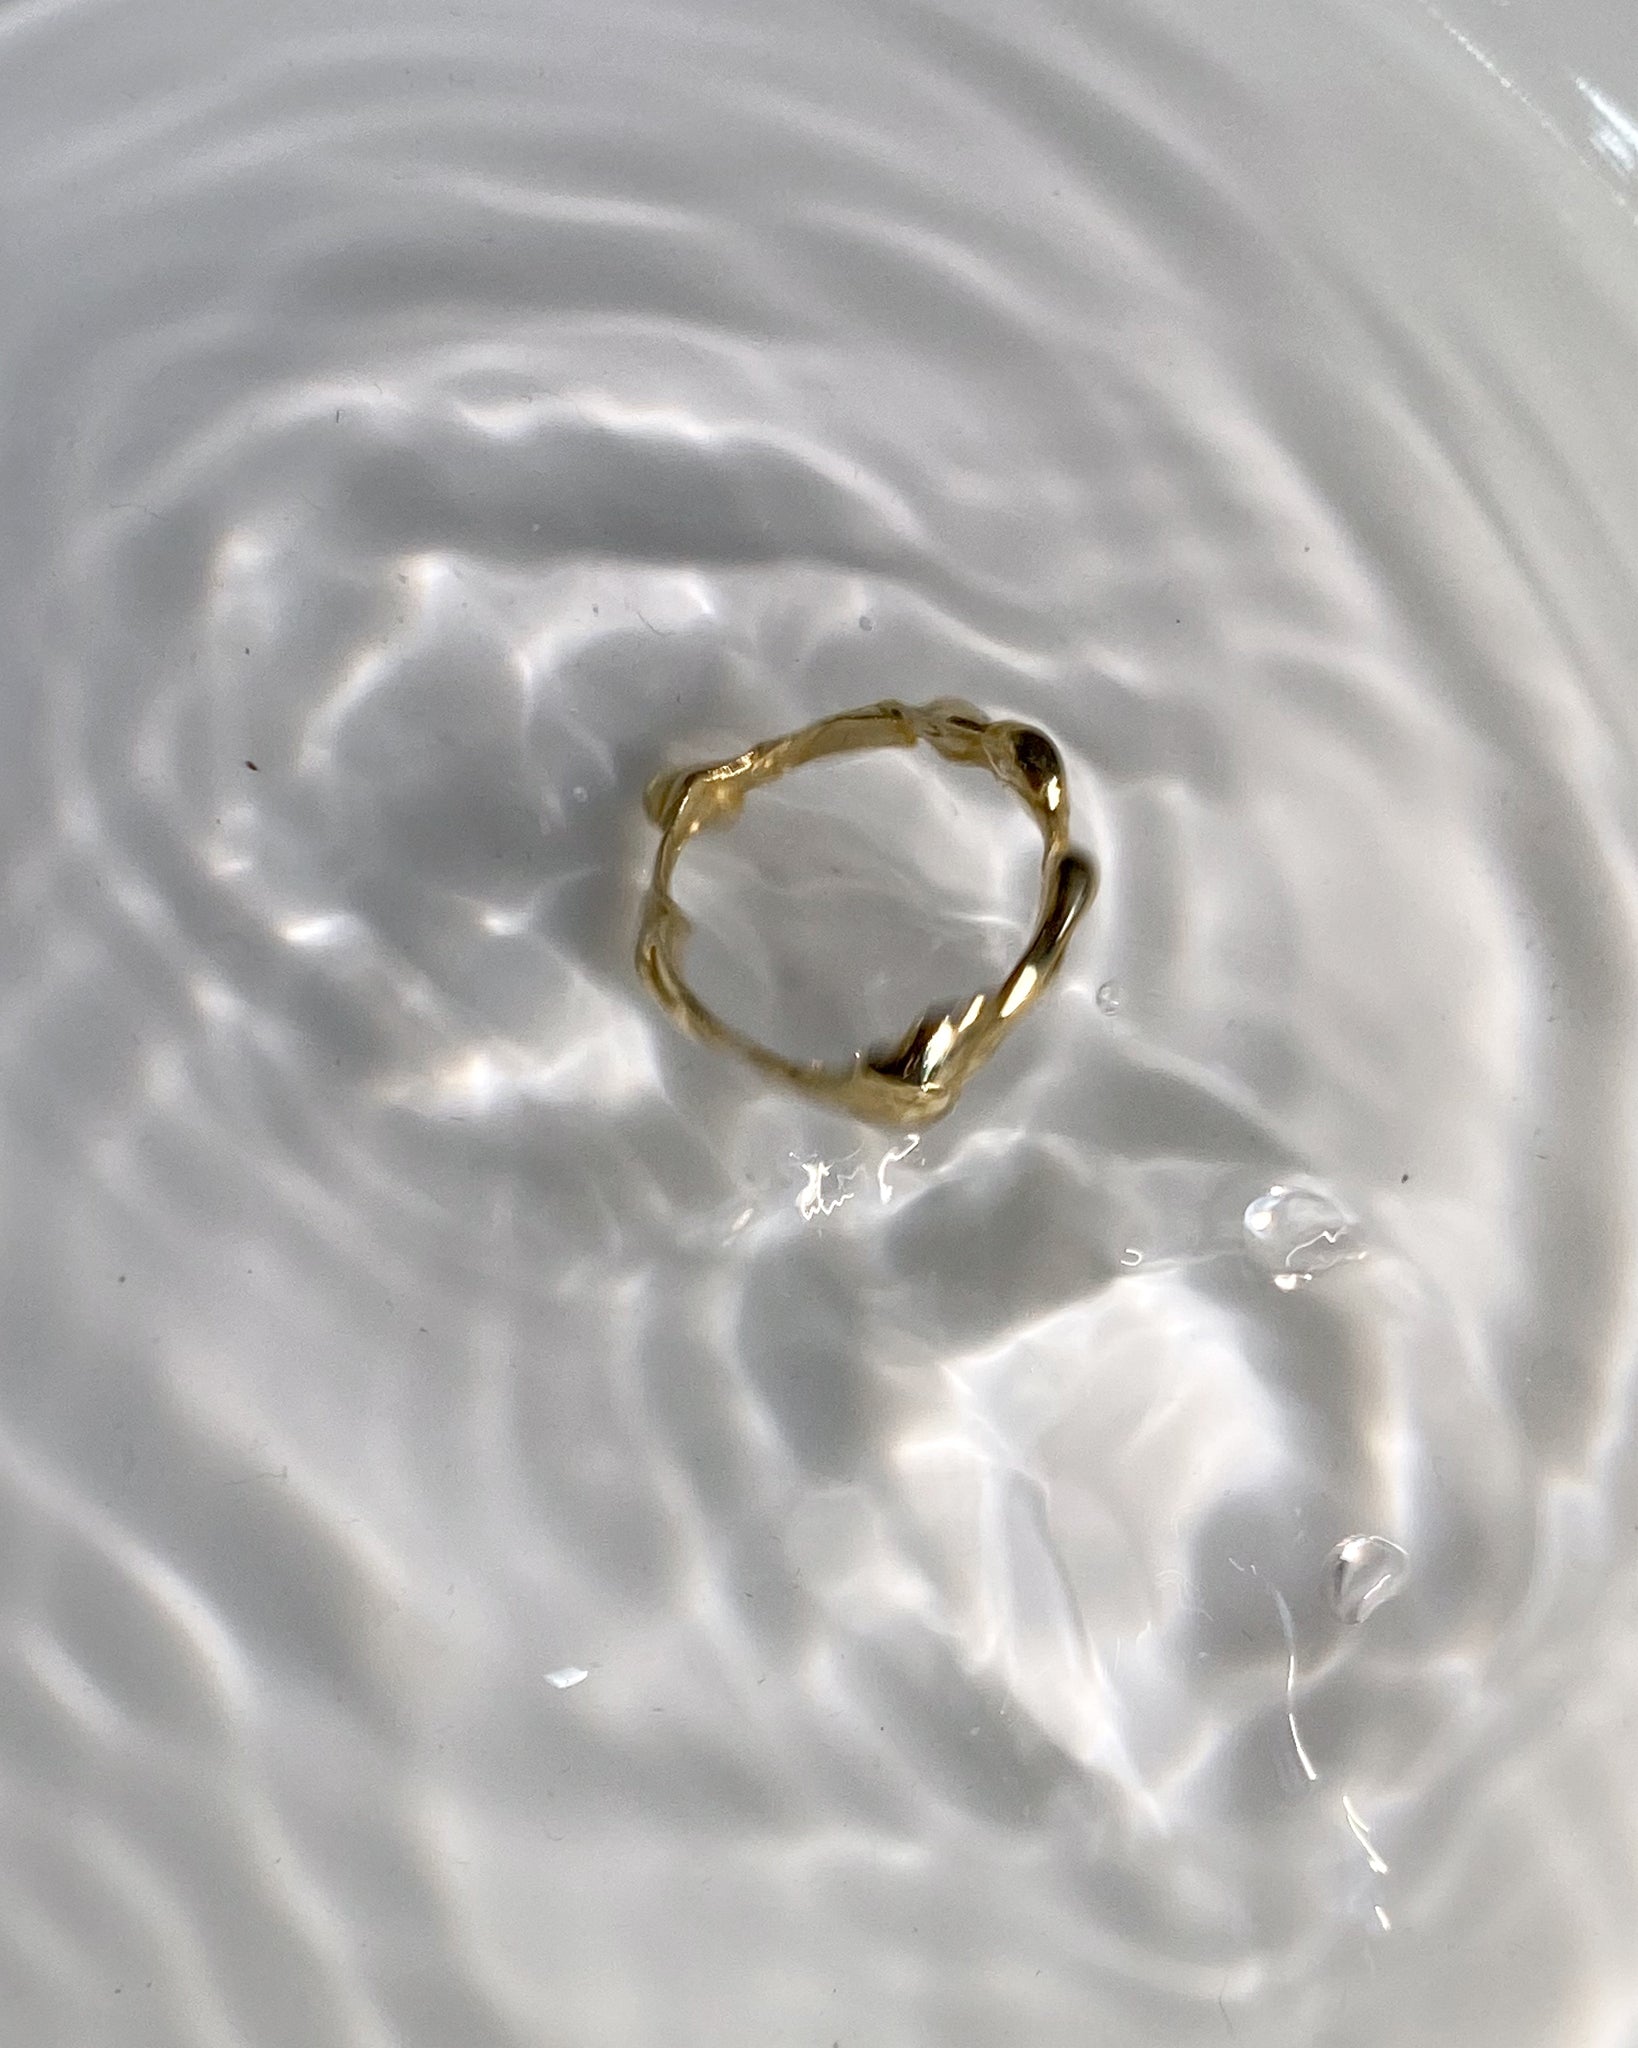 Gold molten ring falling into water